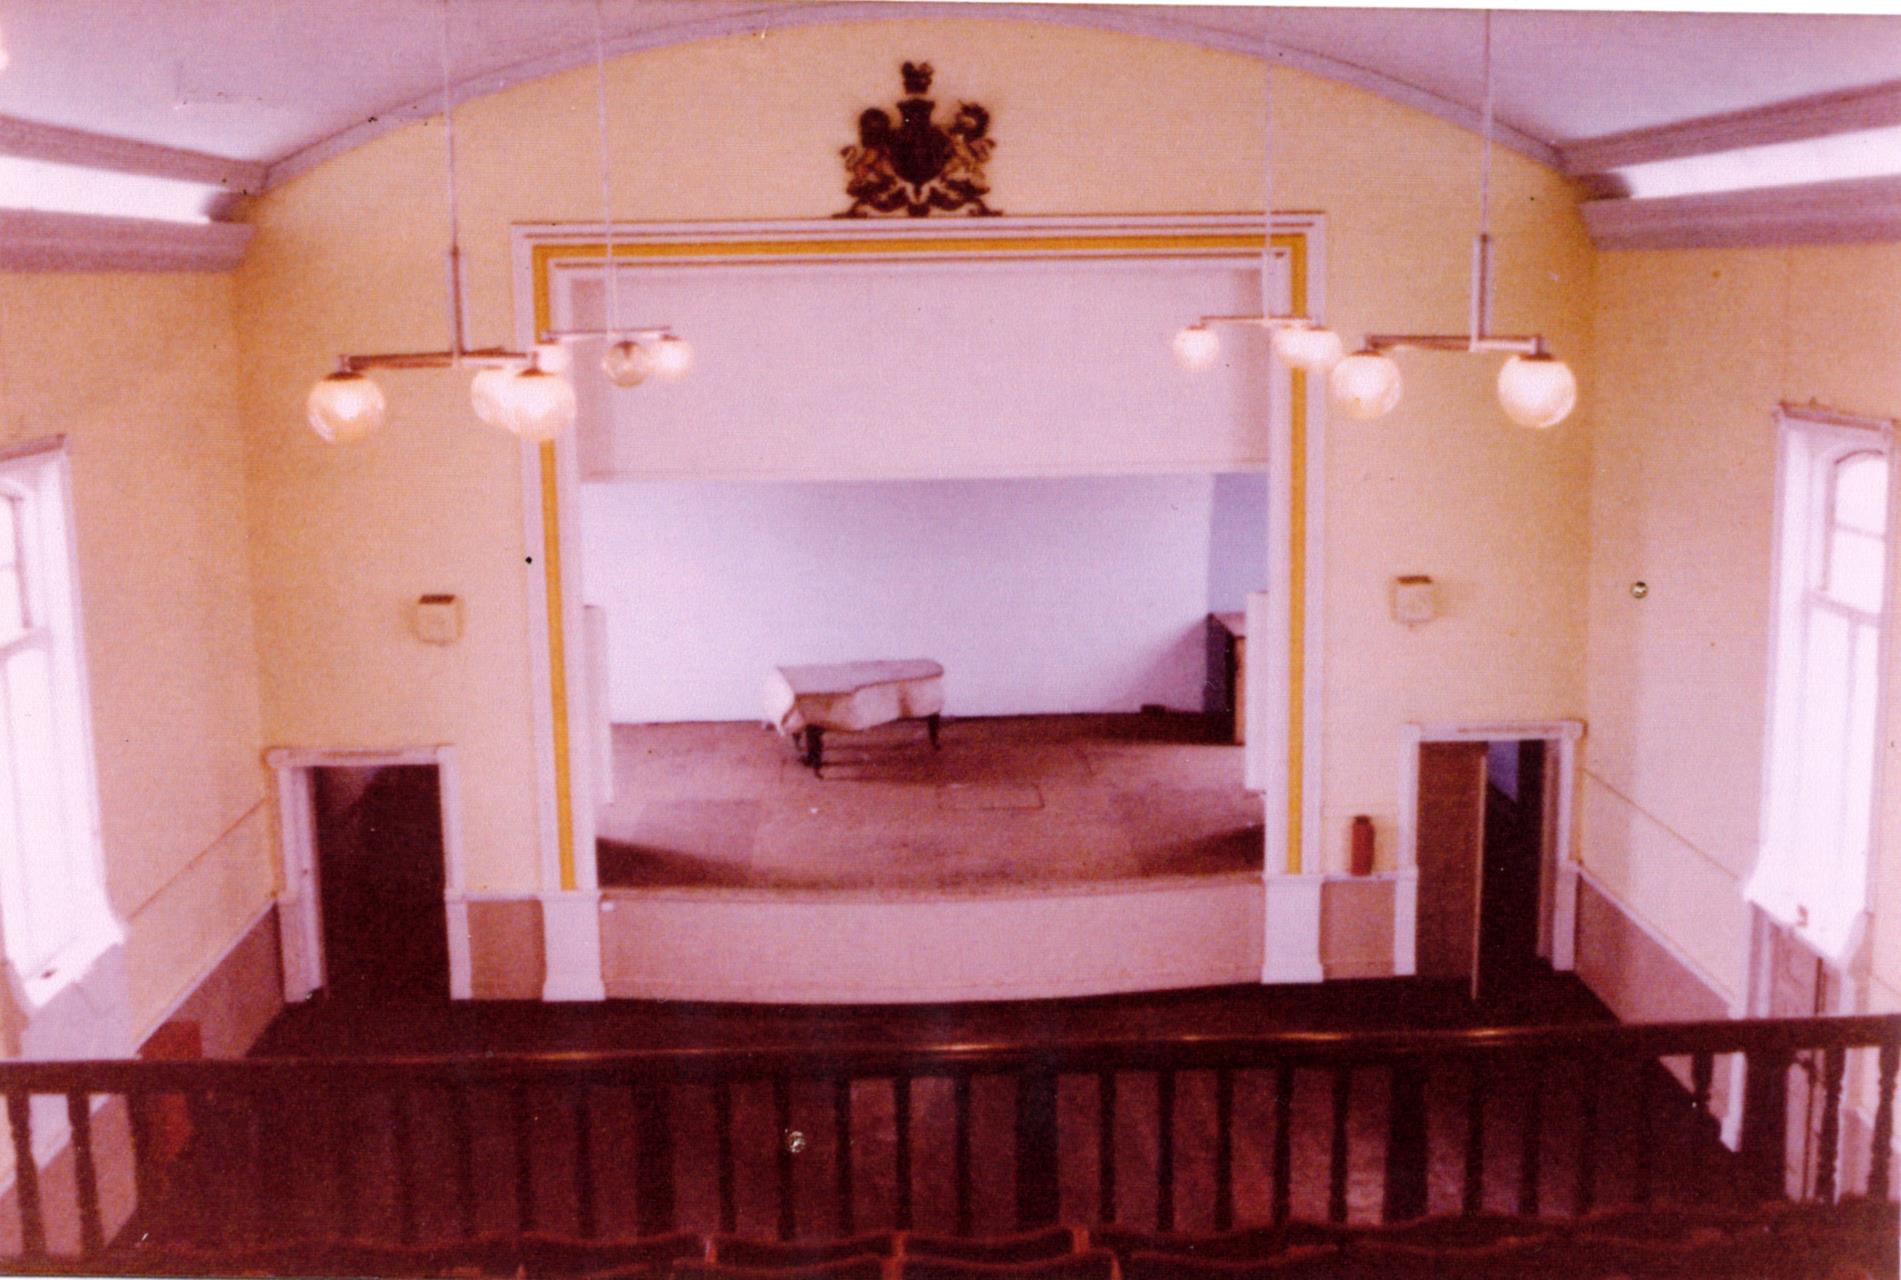 Interior of the Albany Town prior alterations showing the grand piano [ca 1960]